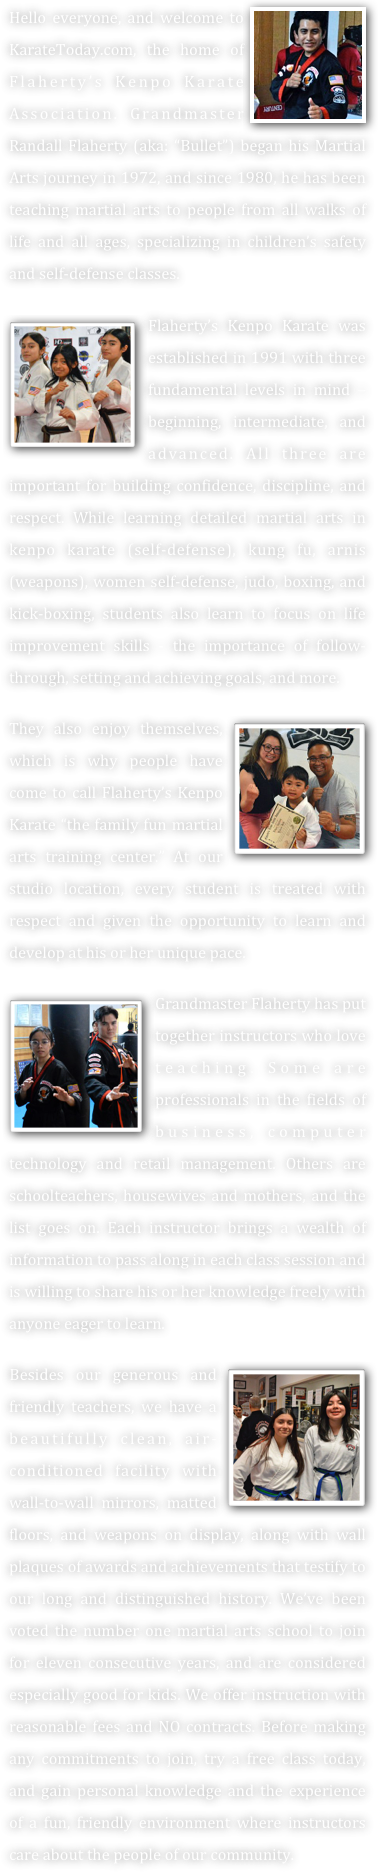 ￼Hello everyone, and welcome to KarateToday.com, the home of Flaherty’s Kenpo Karate Association. Grandmaster Randall Flaherty (aka: “Bullet”) began his Martial Arts journey in 1972, and since 1980, he has been teaching martial arts to people from all walks of life and all ages, specializing in children’s safety and self-defense classes. 

￼Flaherty’s Kenpo Karate was established in 1991 with three fundamental levels in mind – beginning, intermediate, and advanced. All three are important for building confidence, discipline, and respect. While learning detailed martial arts in kenpo karate (self-defense), kung fu, arnis (weapons), women self-defense, judo, boxing, and kick-boxing, students also learn to focus on life improvement skills - the importance of follow-through, setting and achieving goals, and more.

They also enjoy themselves,￼ which is why people have come to call Flaherty’s Kenpo Karate “the family fun martial arts training center.” At our studio location, every student is treated with respect and given the opportunity to learn and develop at his or her unique pace. 

￼Grandmaster Flaherty has put together instructors who love teaching. Some are professionals in the fields of business, computer technology and retail management. Others are schoolteachers, housewives and mothers, and the list goes on. Each instructor brings a wealth of information to pass along in each class session and is willing to share his or her knowledge freely with anyone eager to learn. 

￼Besides our generous and friendly teachers, we have a beautifully clean, air-conditioned facility with wall-to-wall mirrors, matted floors, and weapons on display, along with wall plaques of awards and achievements that testify to our long and distinguished history. We’ve been voted the number one martial arts school to join for eleven consecutive years, and are considered especially good for kids. We offer instruction with reasonable fees and NO contracts. Before making any commitments to join, try a free class today, and gain personal knowledge and the experience of a fun, friendly environment where instructors care about the people of our community. 